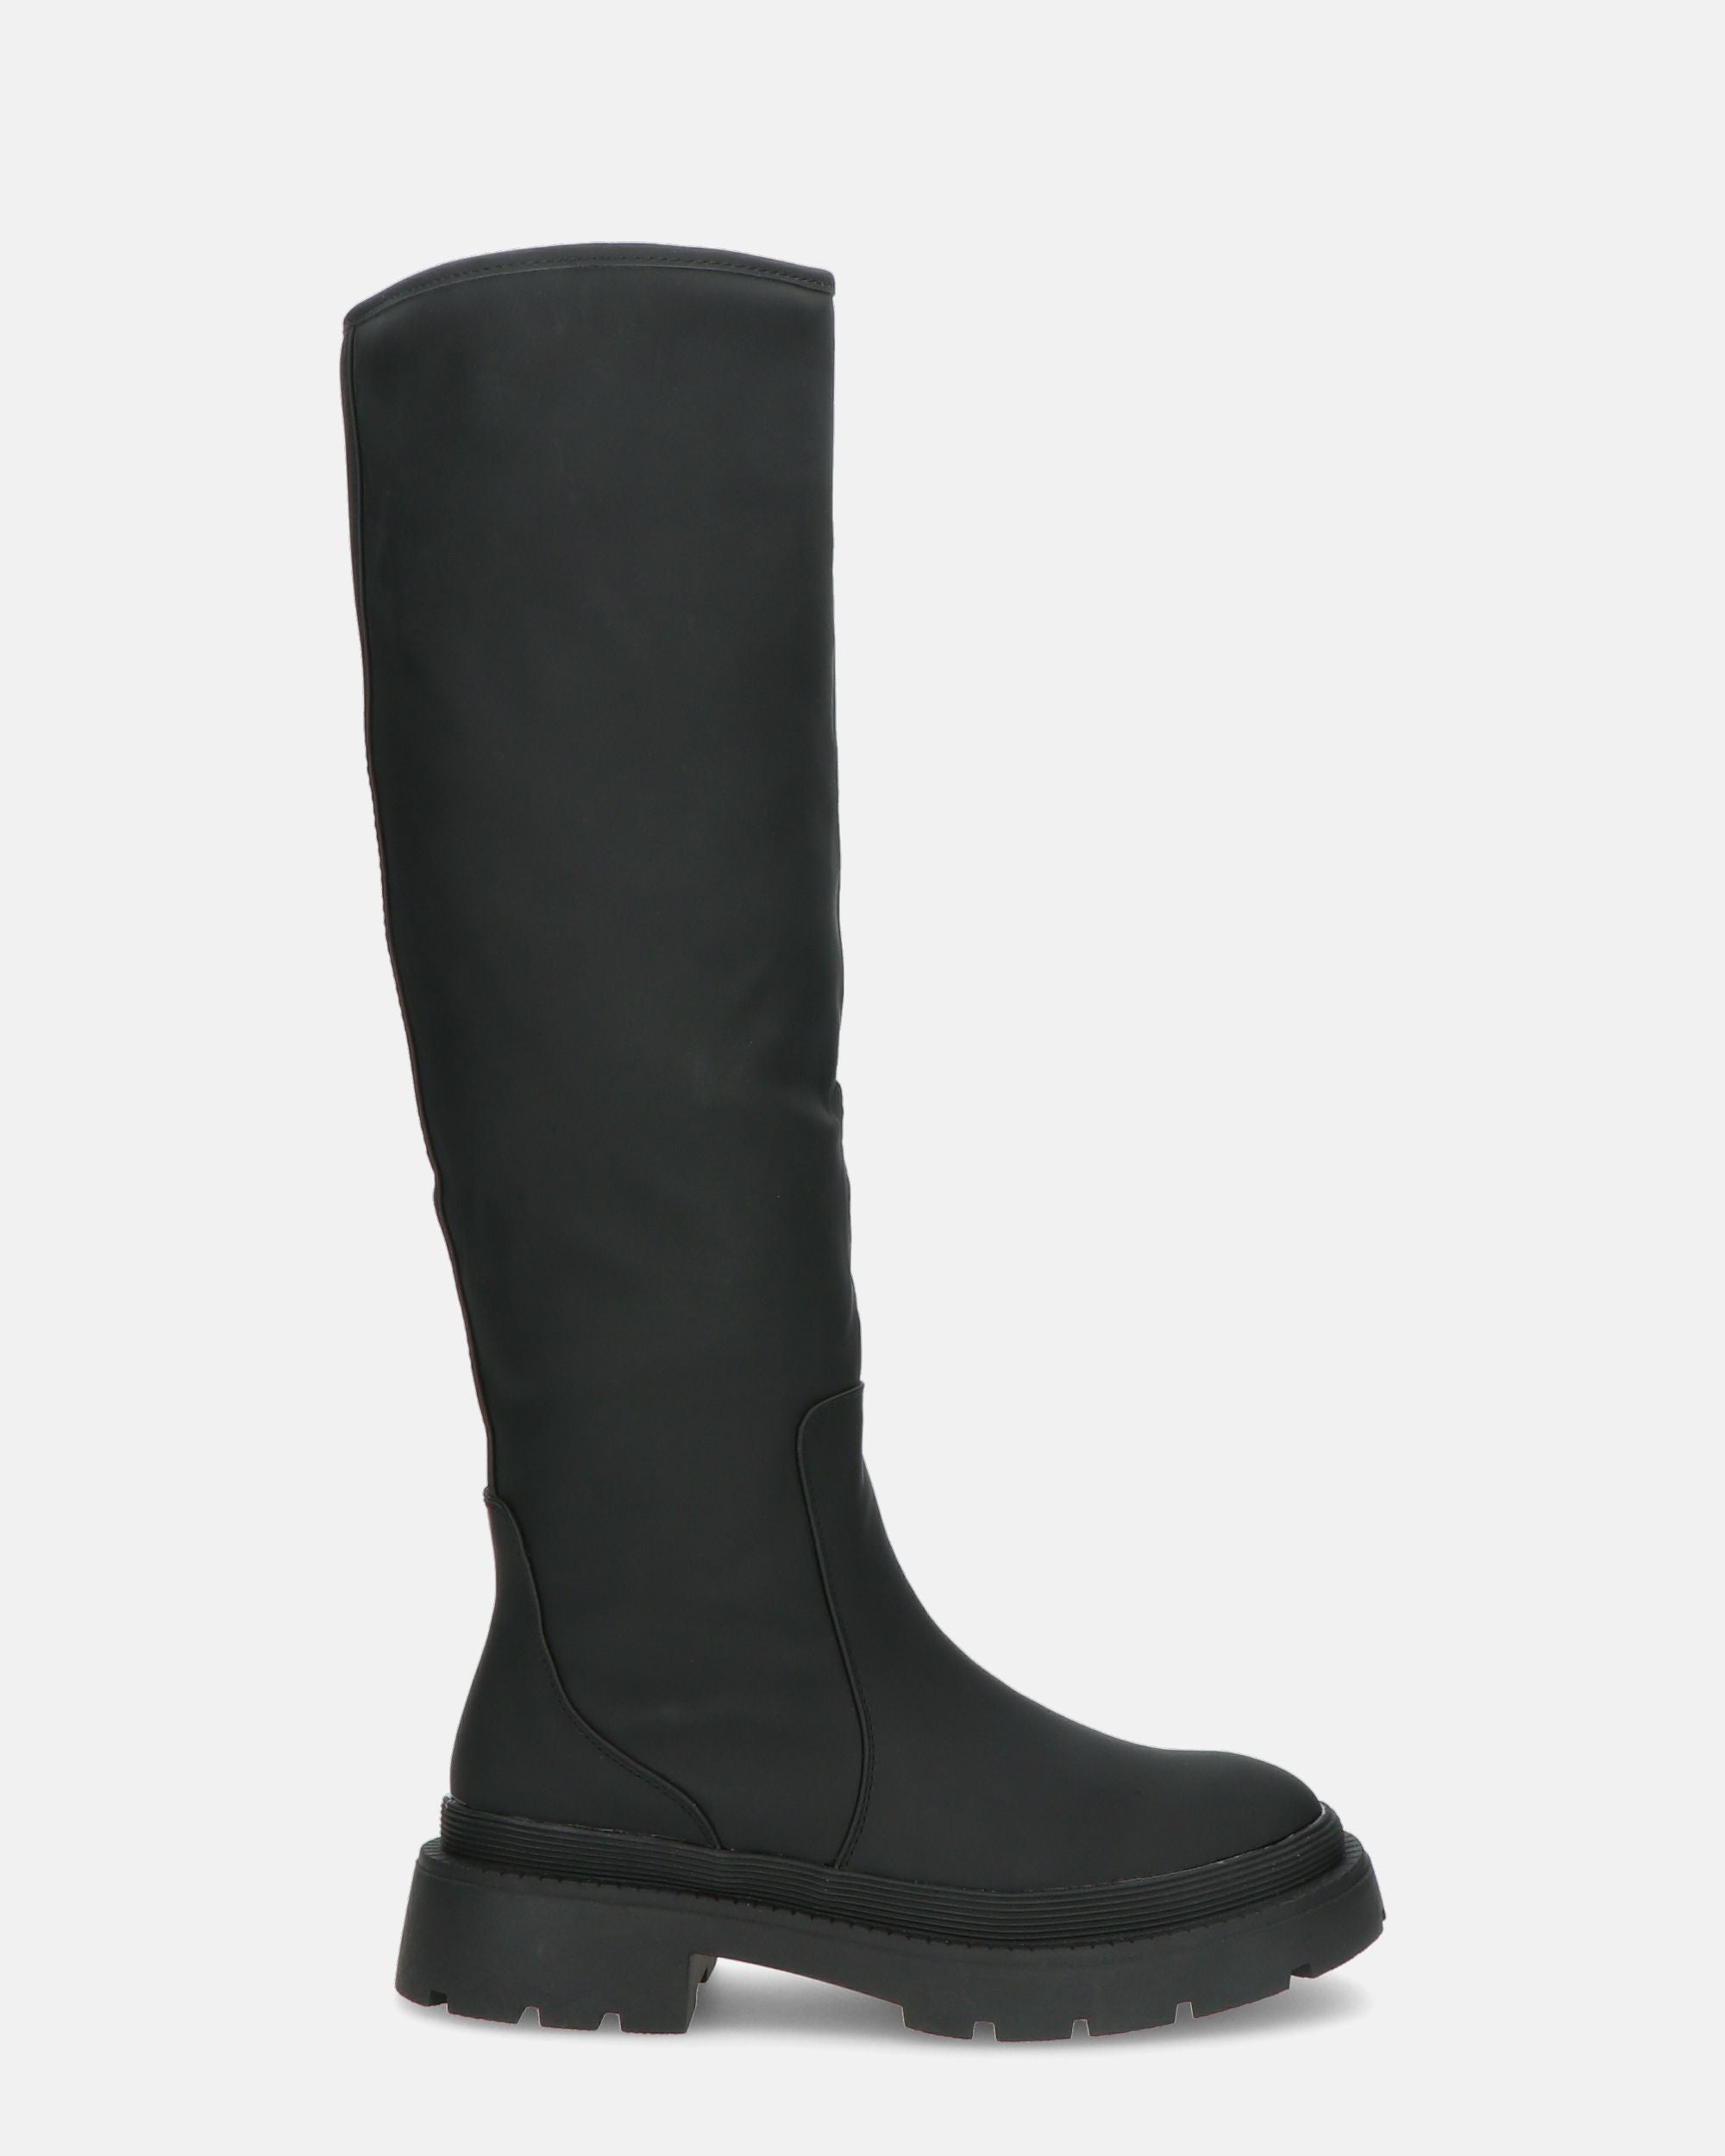 LULU - black high boots with low heel